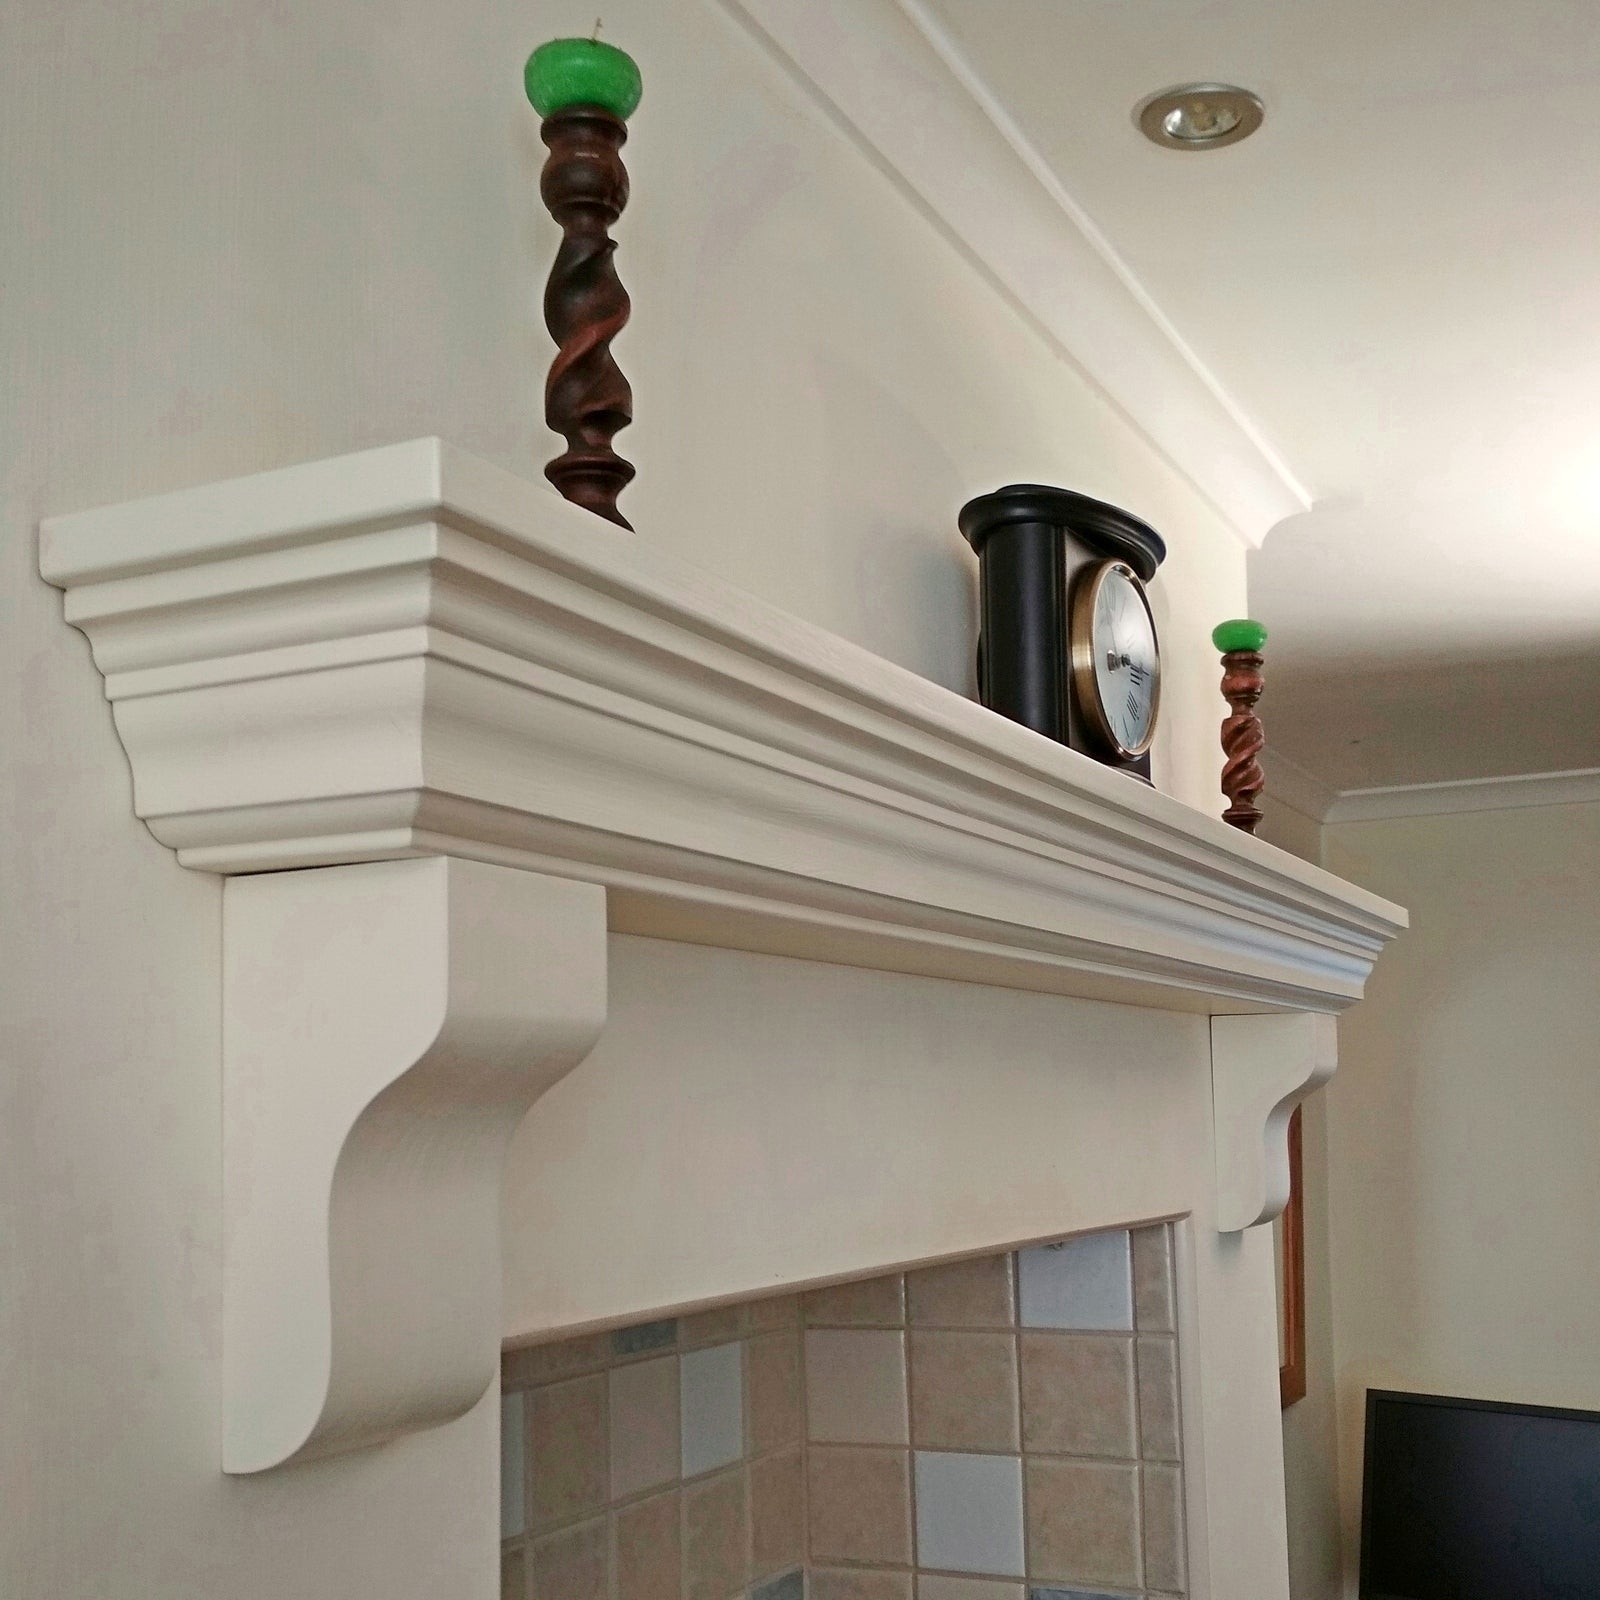 VICTORIAN Style Mantel Shelf with or w/o Corbels, Handmade Solid Pine Wood Fireplace Stove Oven Kitchen Overmantle